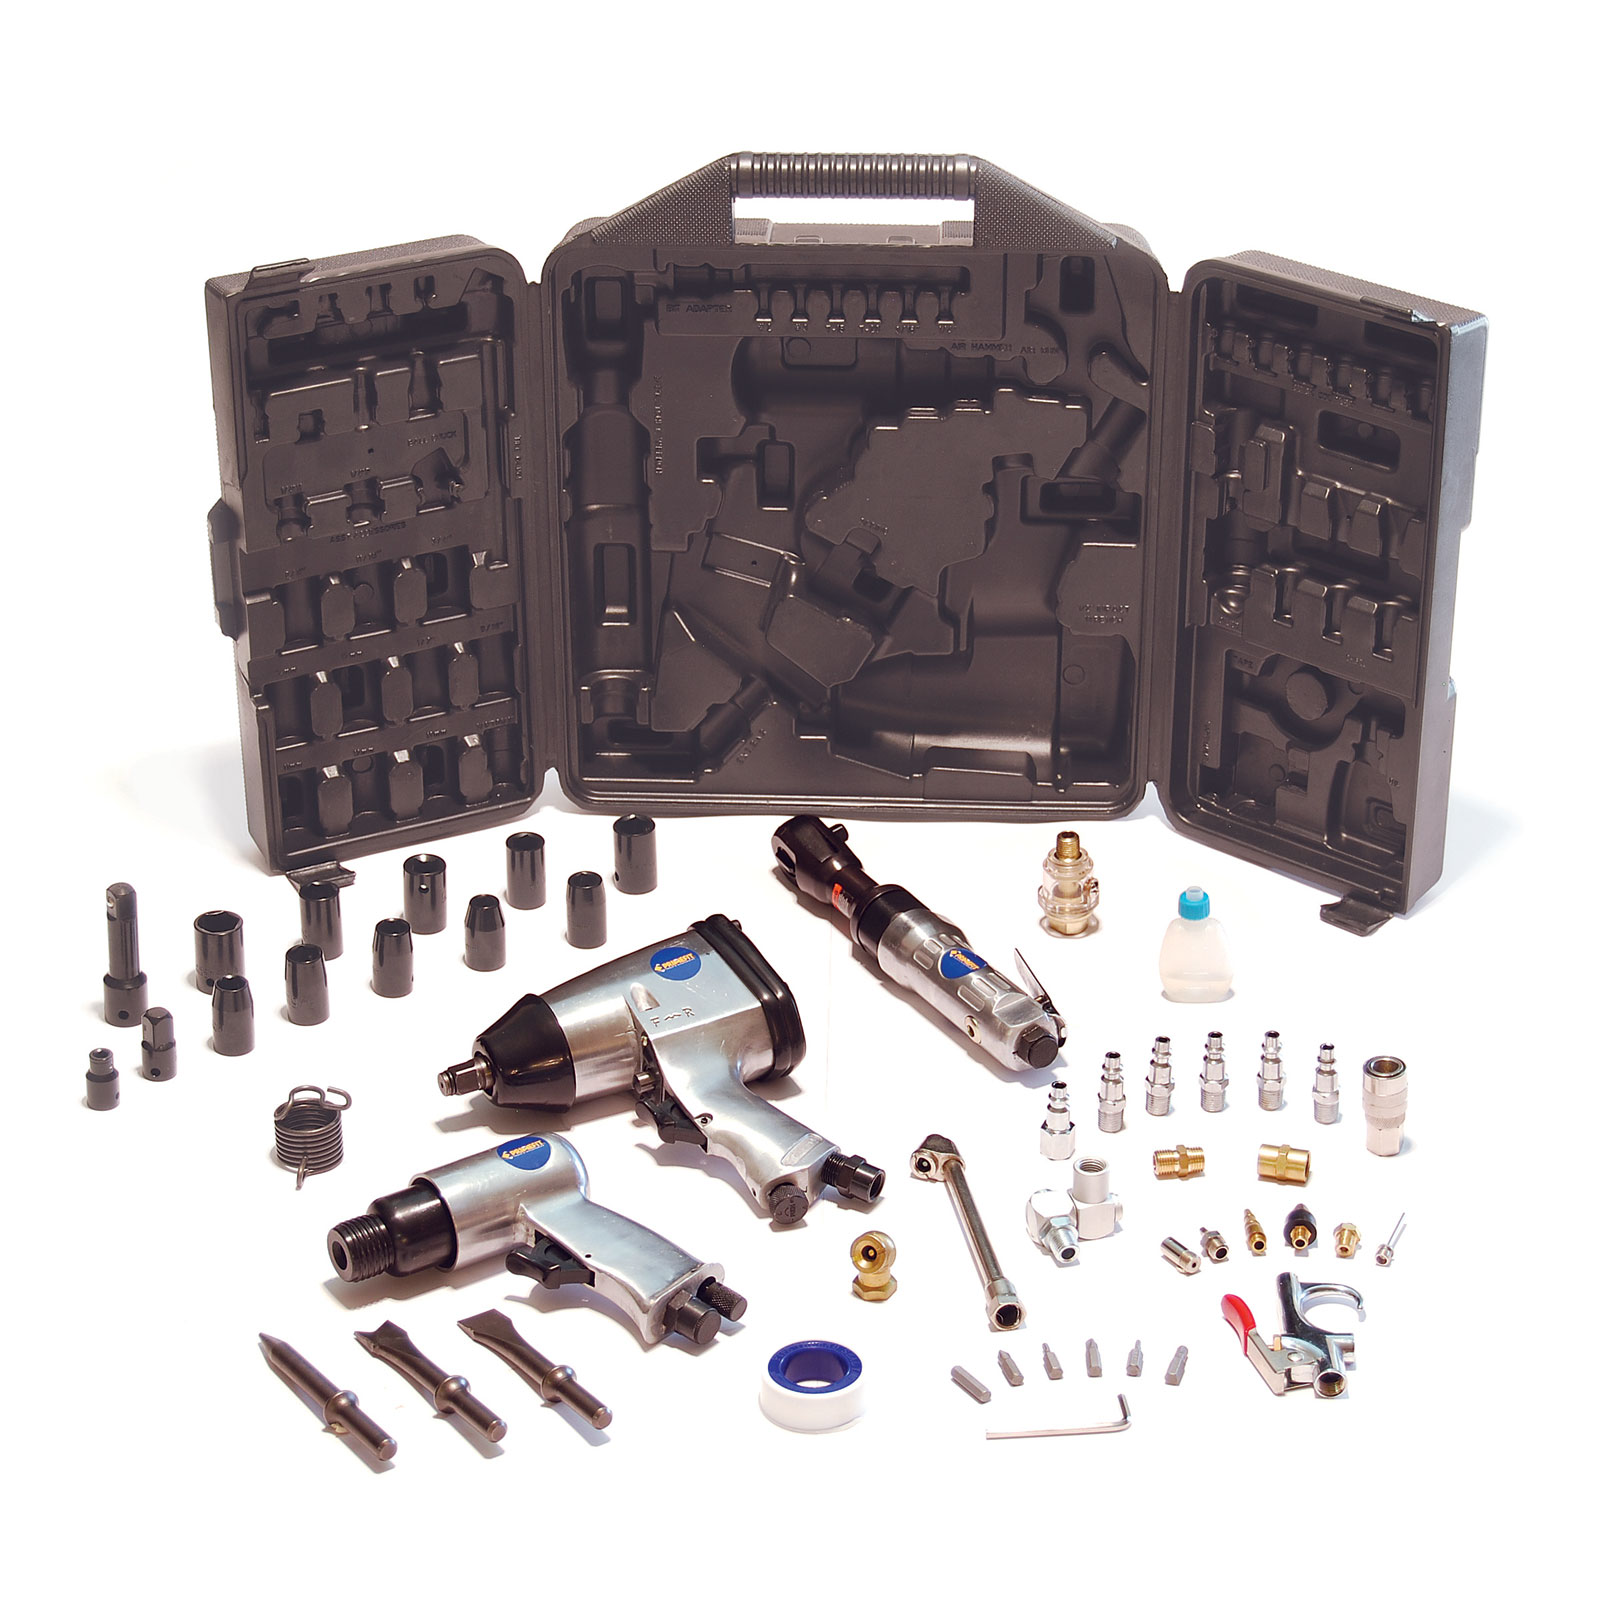 Prime Fit ATK1000 50-Piece Air Tool Kit with Black Storage Case